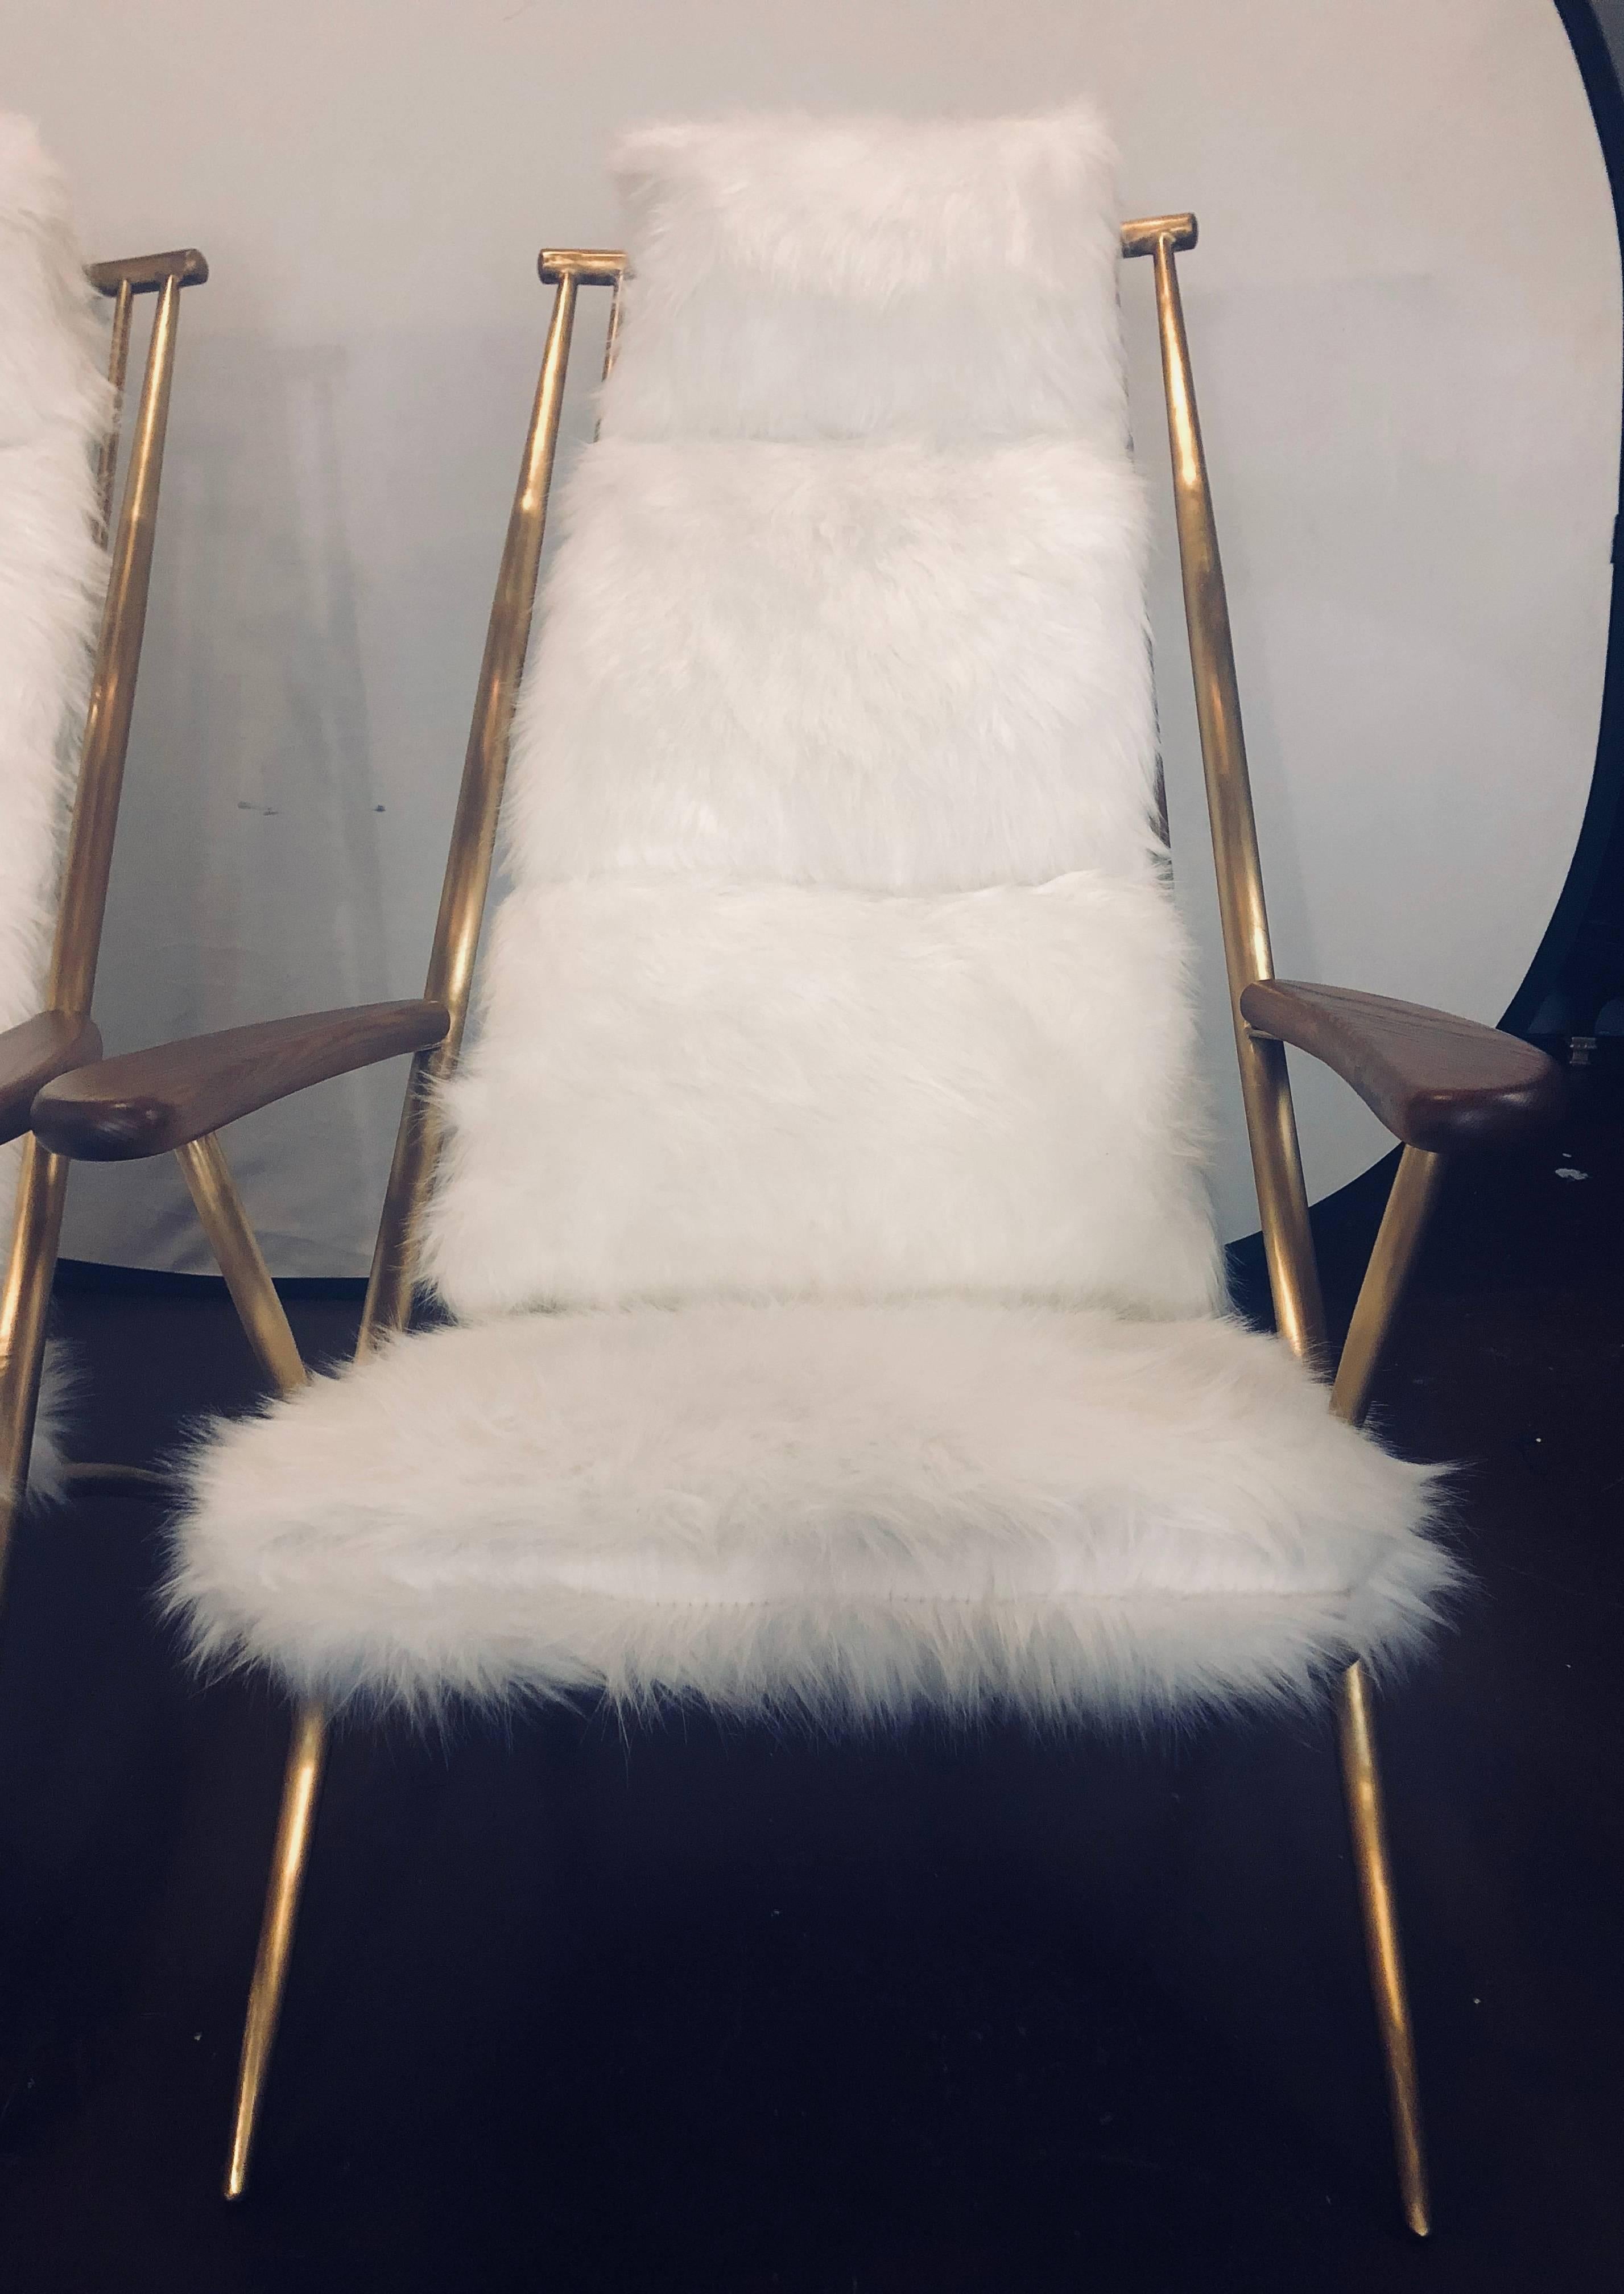 Pair of Hollywood Regency style shearling style lounge chairs each having a matching ottoman. The pair made of a gilt metal that is strong and sturdy with ladder form having overstuffed cushions that are surprisingly comfortable. This highly sleek